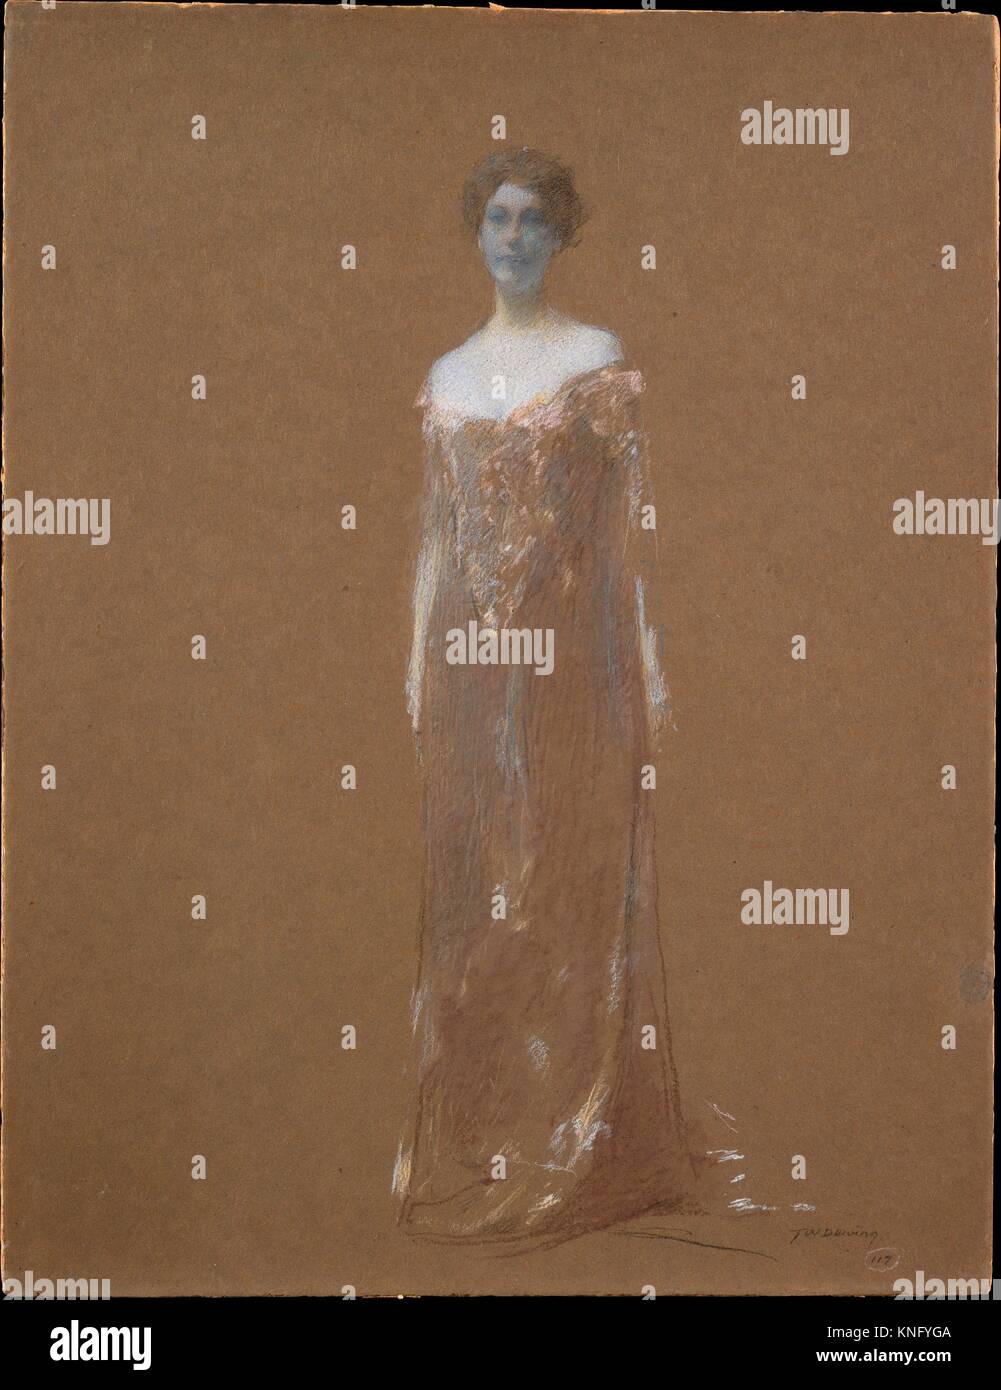 The Evening Dress. Artist: Thomas Wilmer Dewing (1851-1938); Date: before 1926; Medium: Pastel on brown paper cardboard; Dimensions: Sight: 14 1/4 x Stock Photo